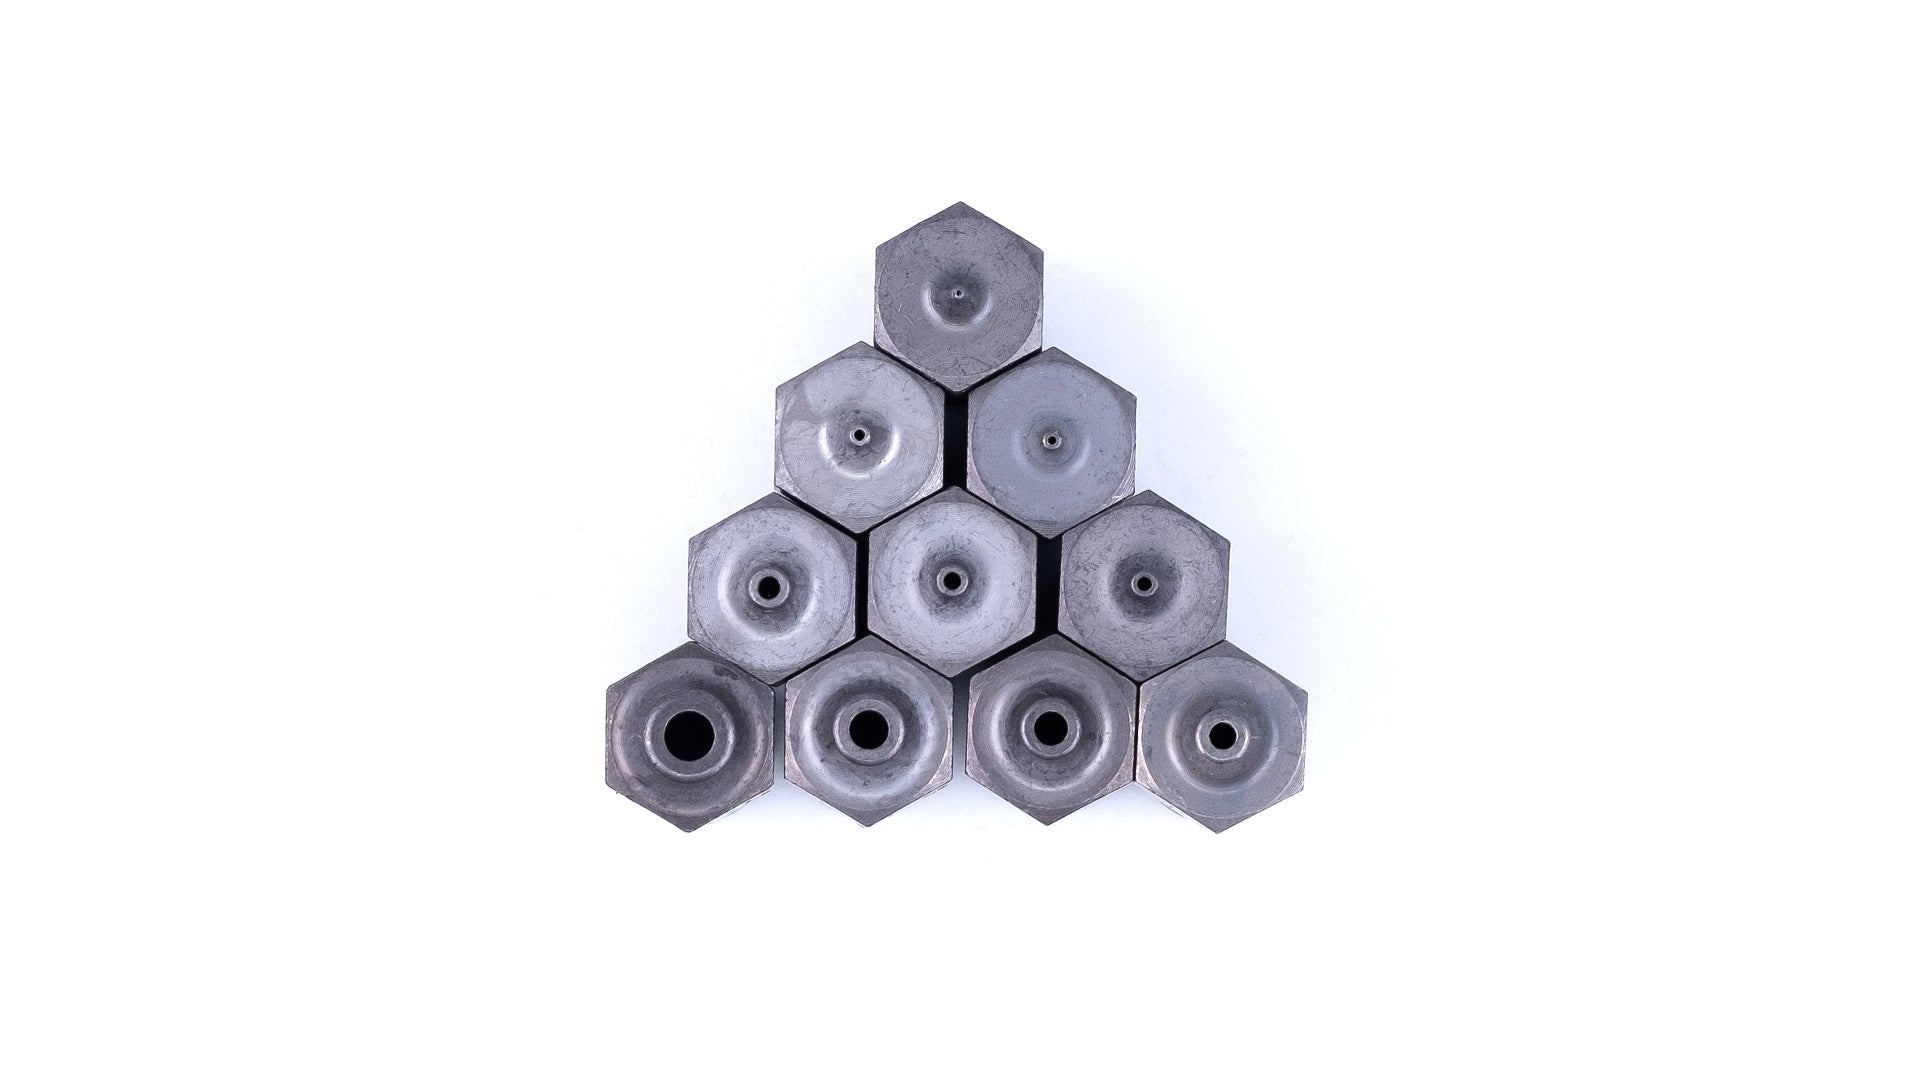 Image of 10 nozzles with different orifice sizes